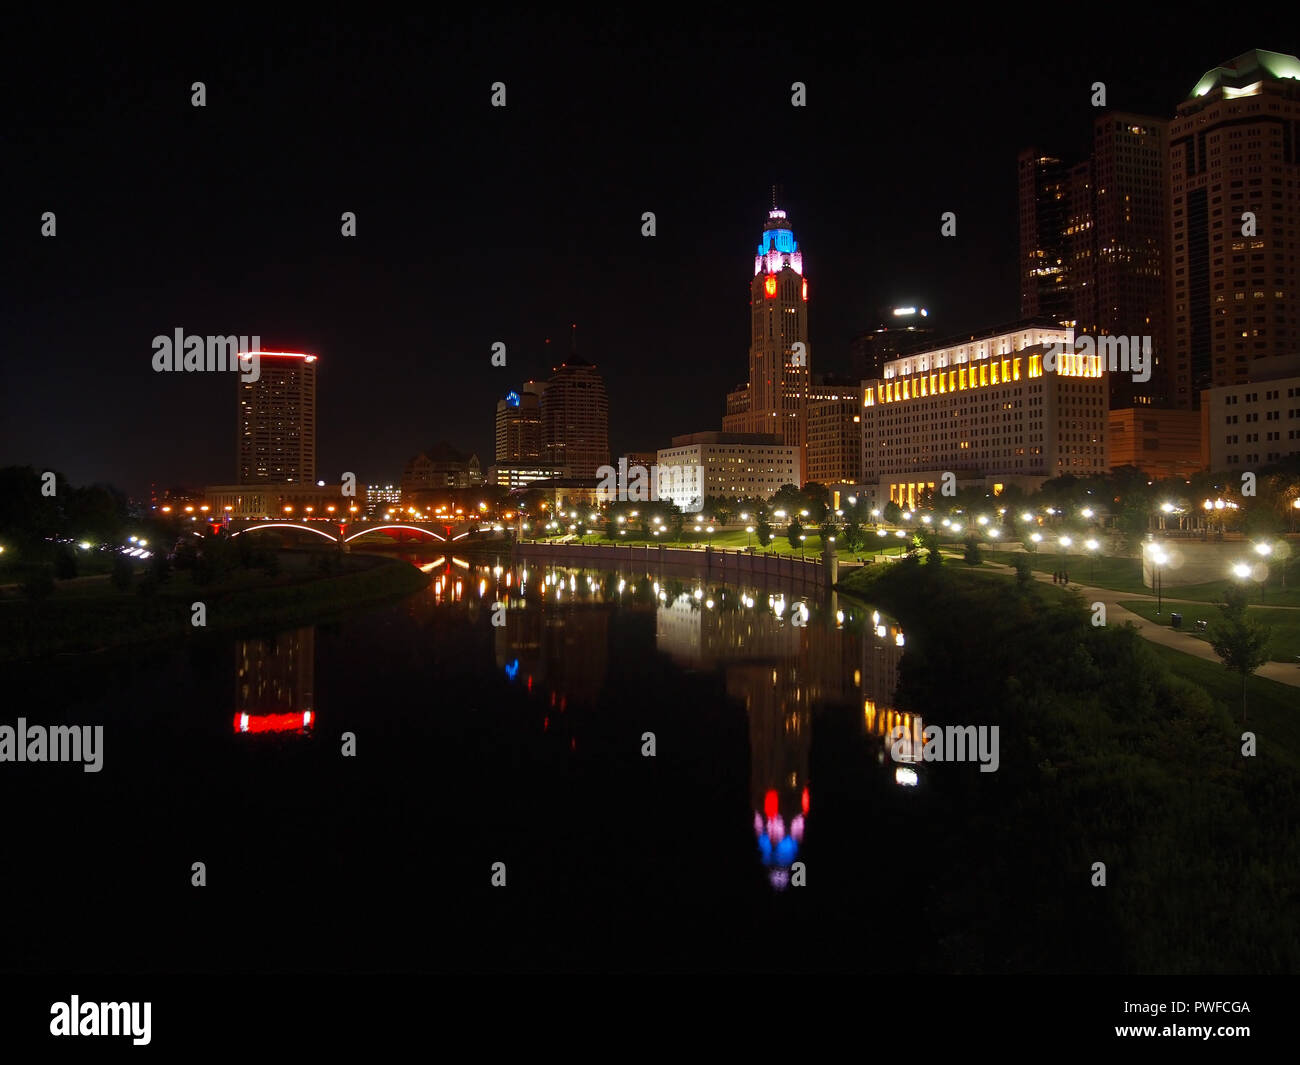 COLUMBUS, OHIO - JULY 15, 2018: Looking up the Scioto River at the skyline of Columbus, Ohio over the tree lined, grassy. lighted pathways and sidewal Stock Photo